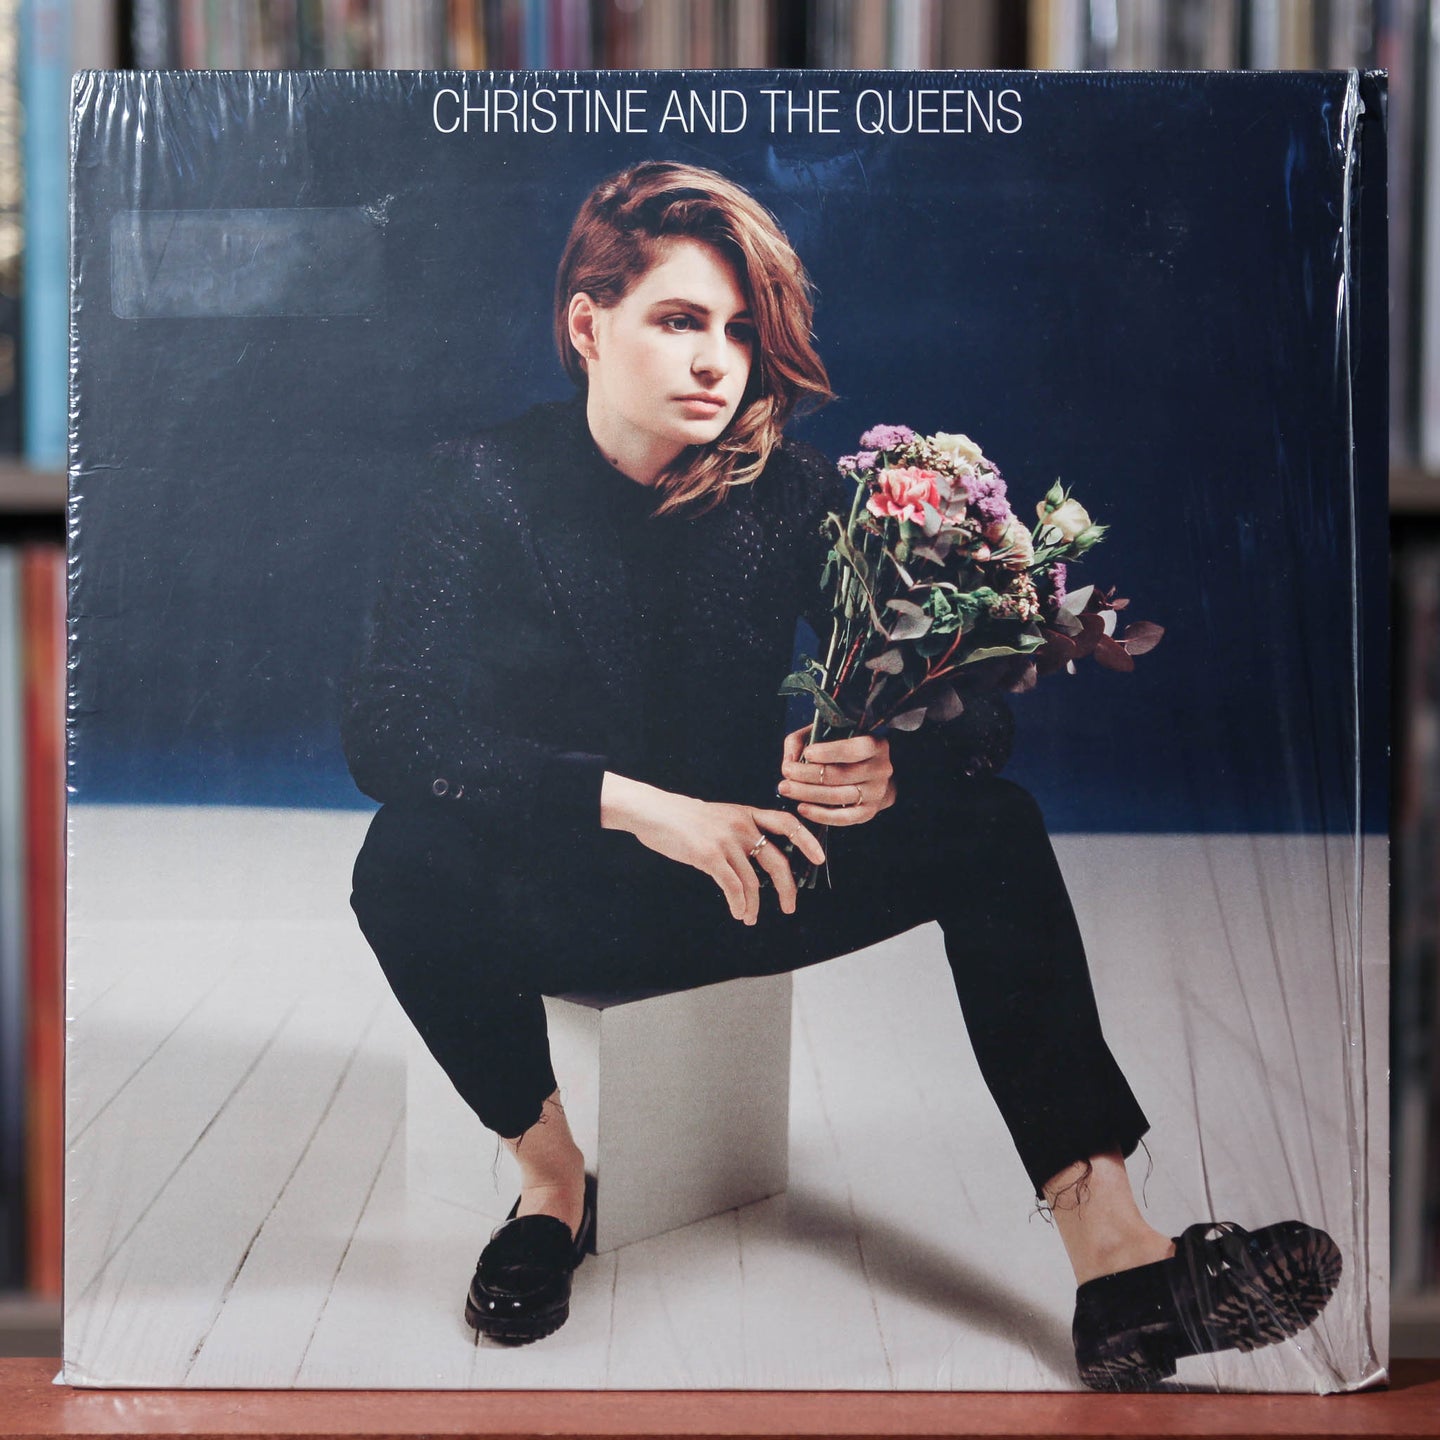 Christine And The Queens - Chaleur Humaine - Blue Vinyl - 2014 Because Music, EX/VG+ w/Shrink